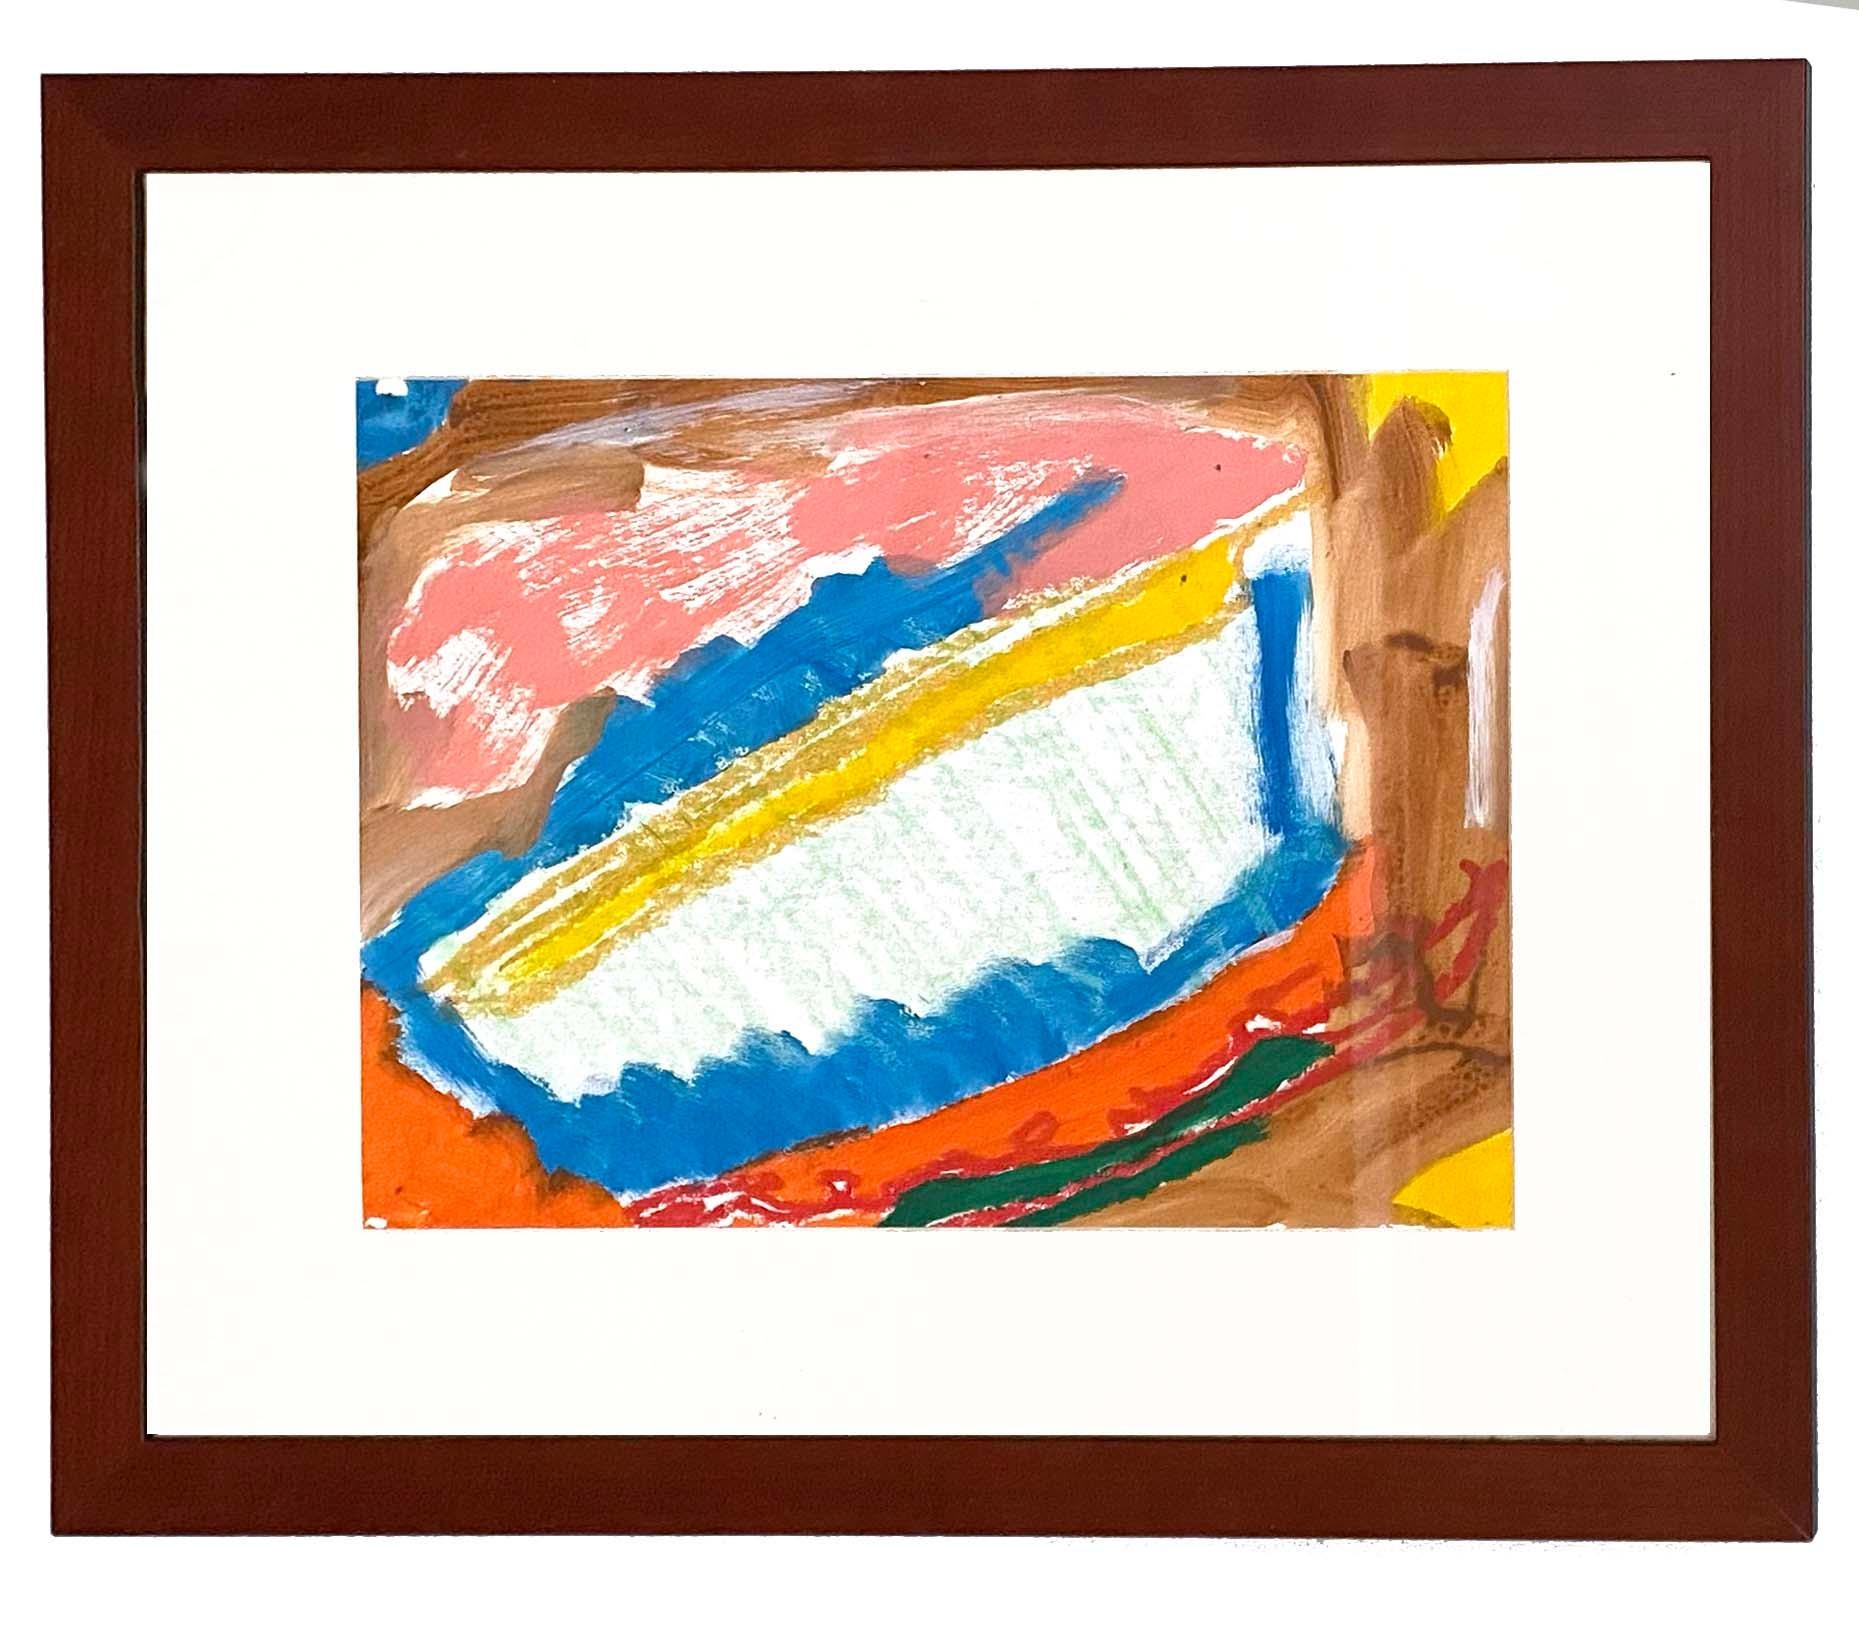 An original acrylic on paper by American modernist Robert McBride.

This charming painting is titled Untitled Toothbrush and features fantastic colors and brushwork.

This work comes in an archival frame presentation.